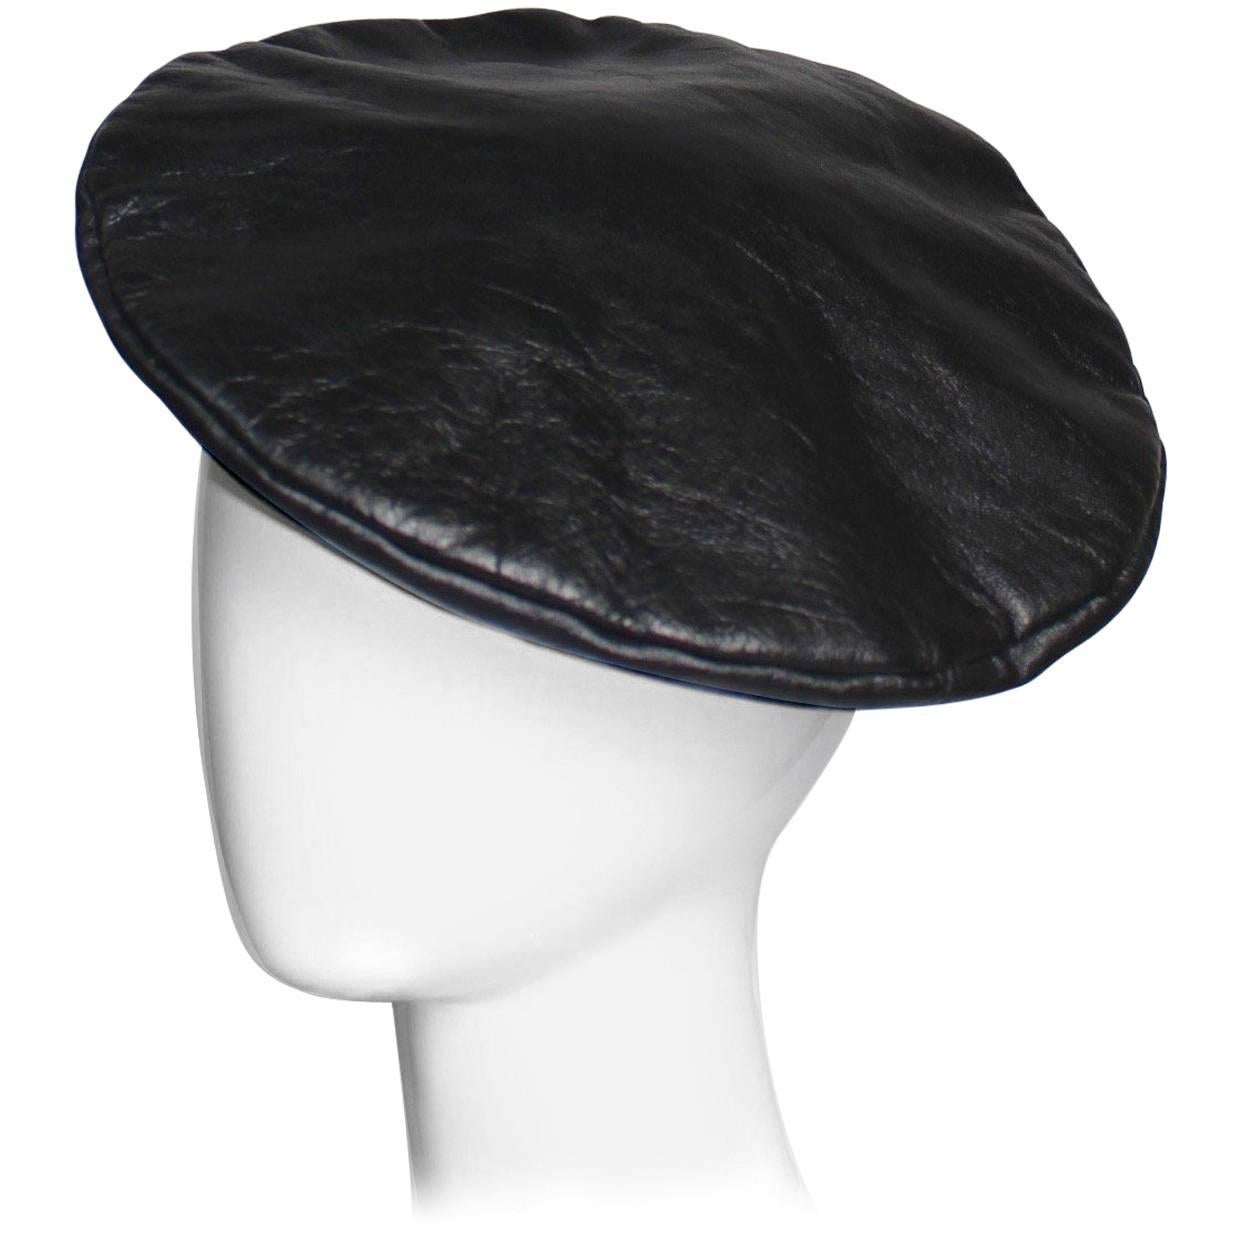 Yves Saint Laurent was a master at envisioning the high-fashion potential in that which others might have dismissed as common, whether that was the suit, the safari jacket or the peasant dress. This beret is no exception. He made the French working